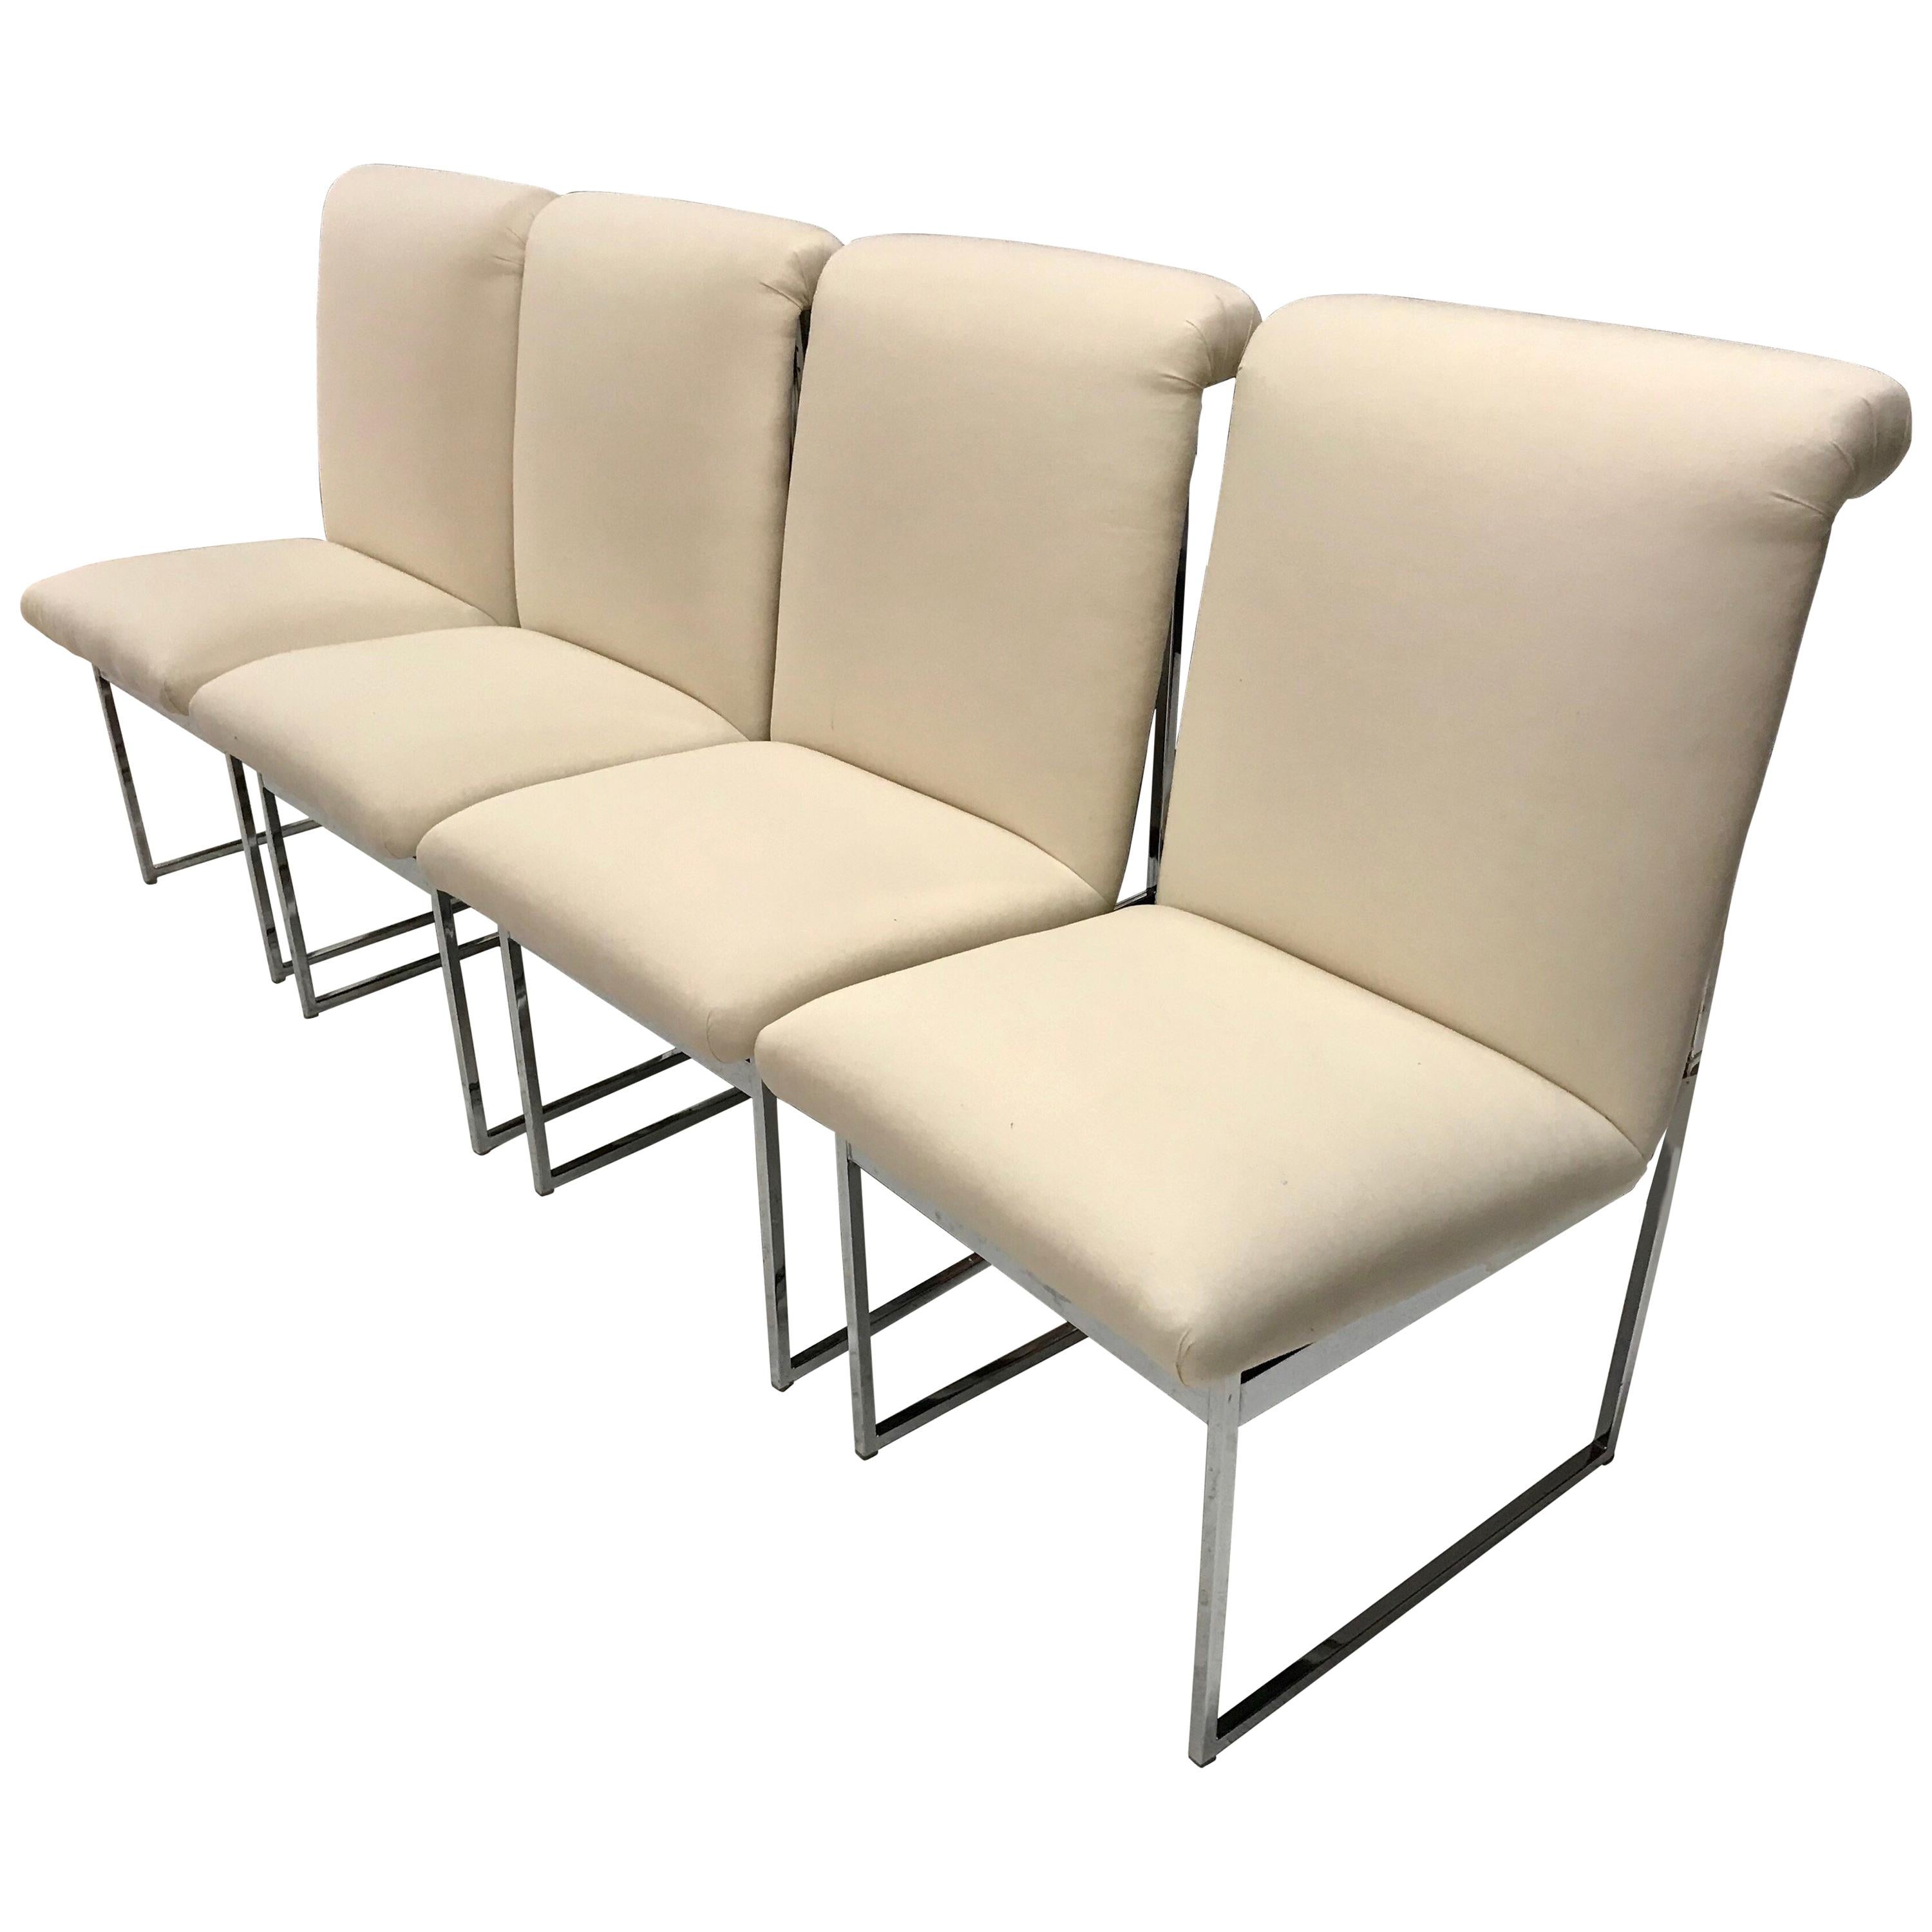 Set of Four Mid-Century Modern Milo Baughman Style Steel Chrome Dining Chairs